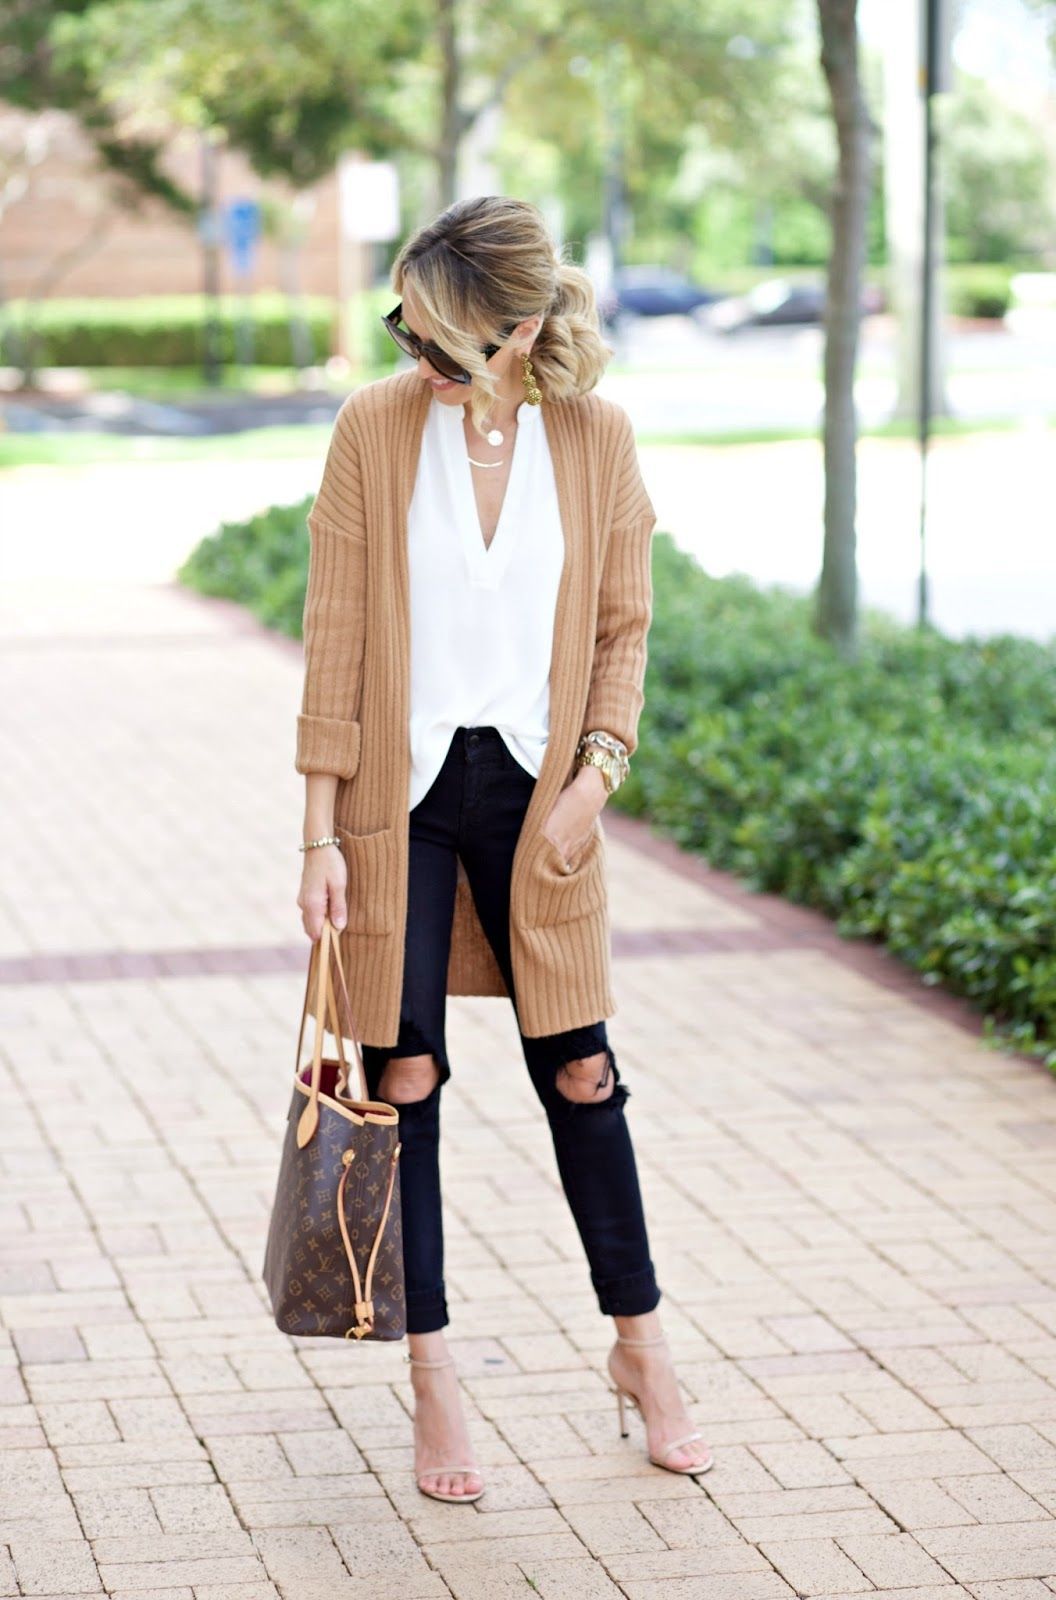 Brilliant 21+ Easy Fall Outfit Ideas for Women https://Traveller Location